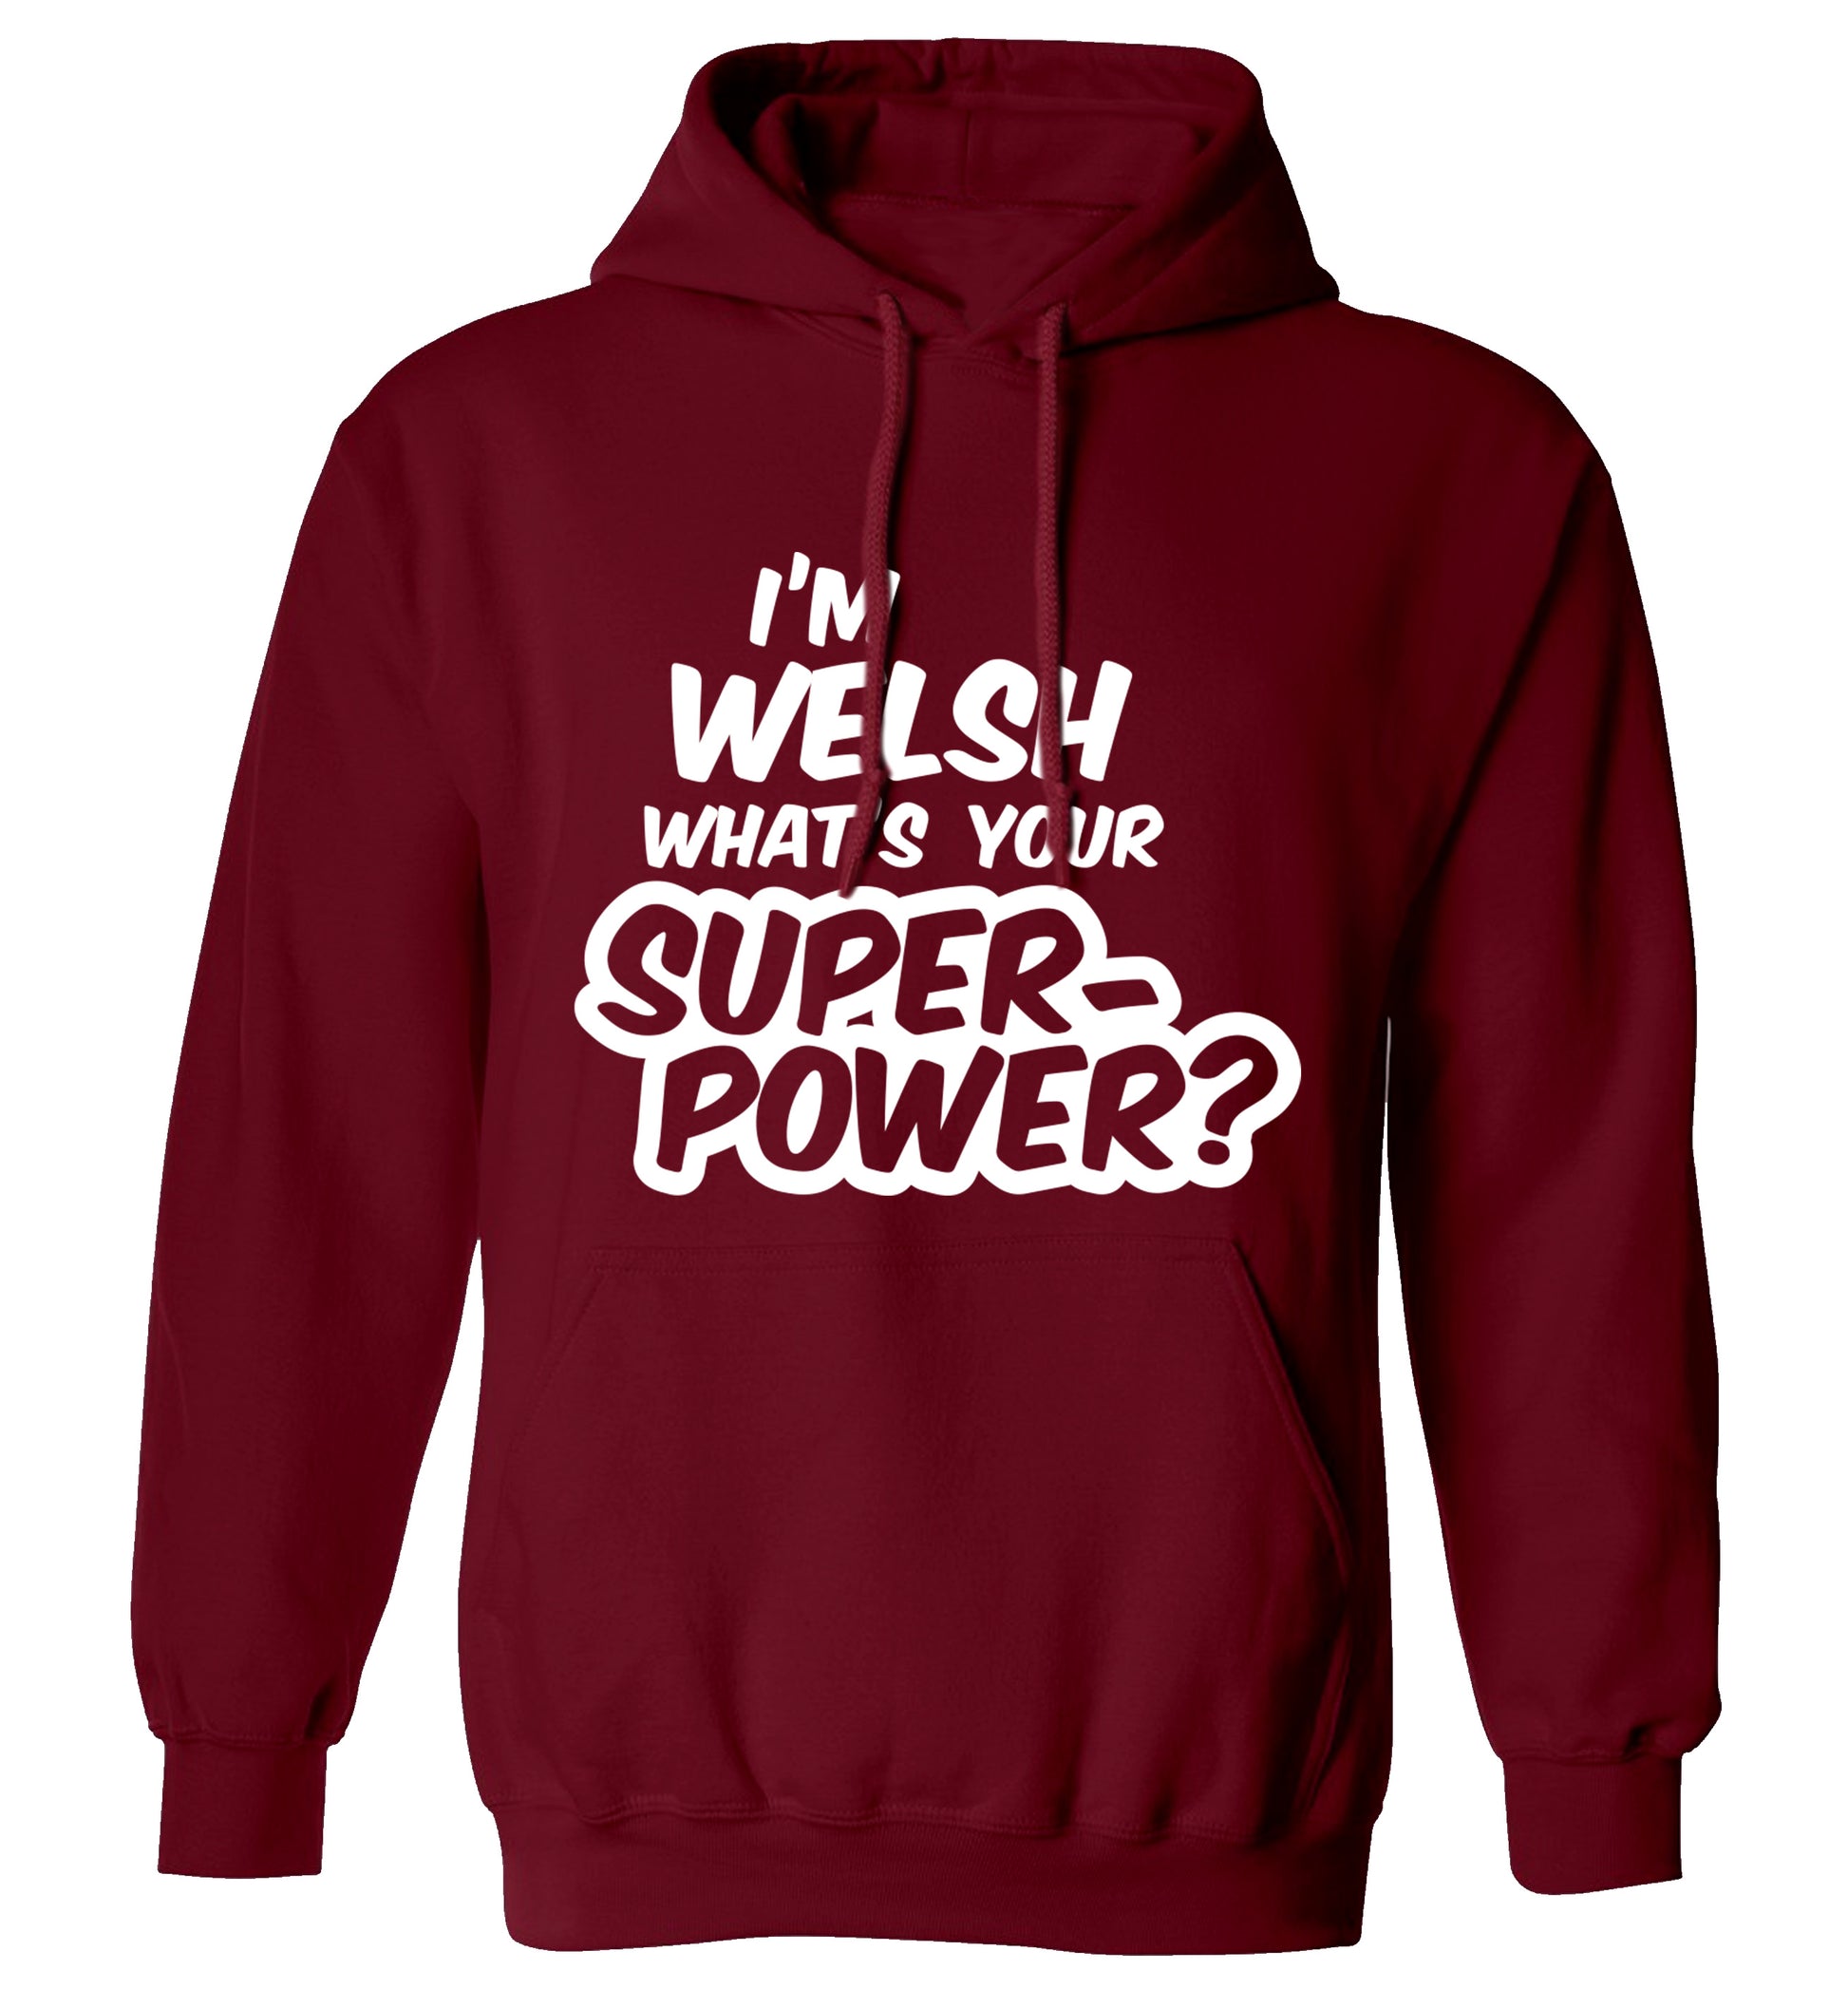 I'm Welsh what's your superpower? adults unisex maroon hoodie 2XL